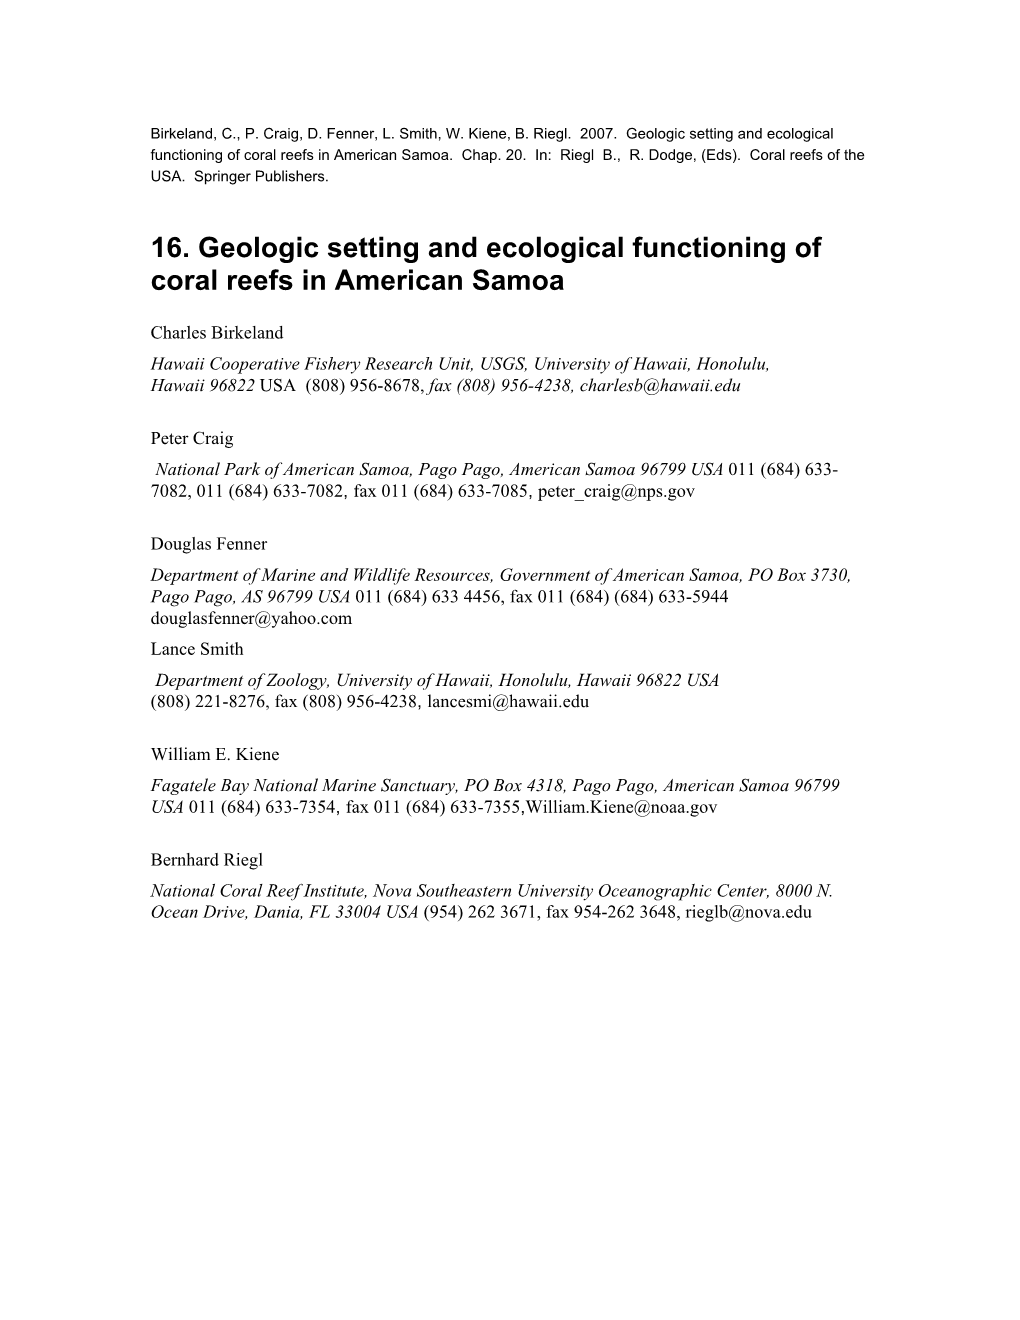 16. Geologic Setting and Ecological Functioning of Coral Reefs in American Samoa